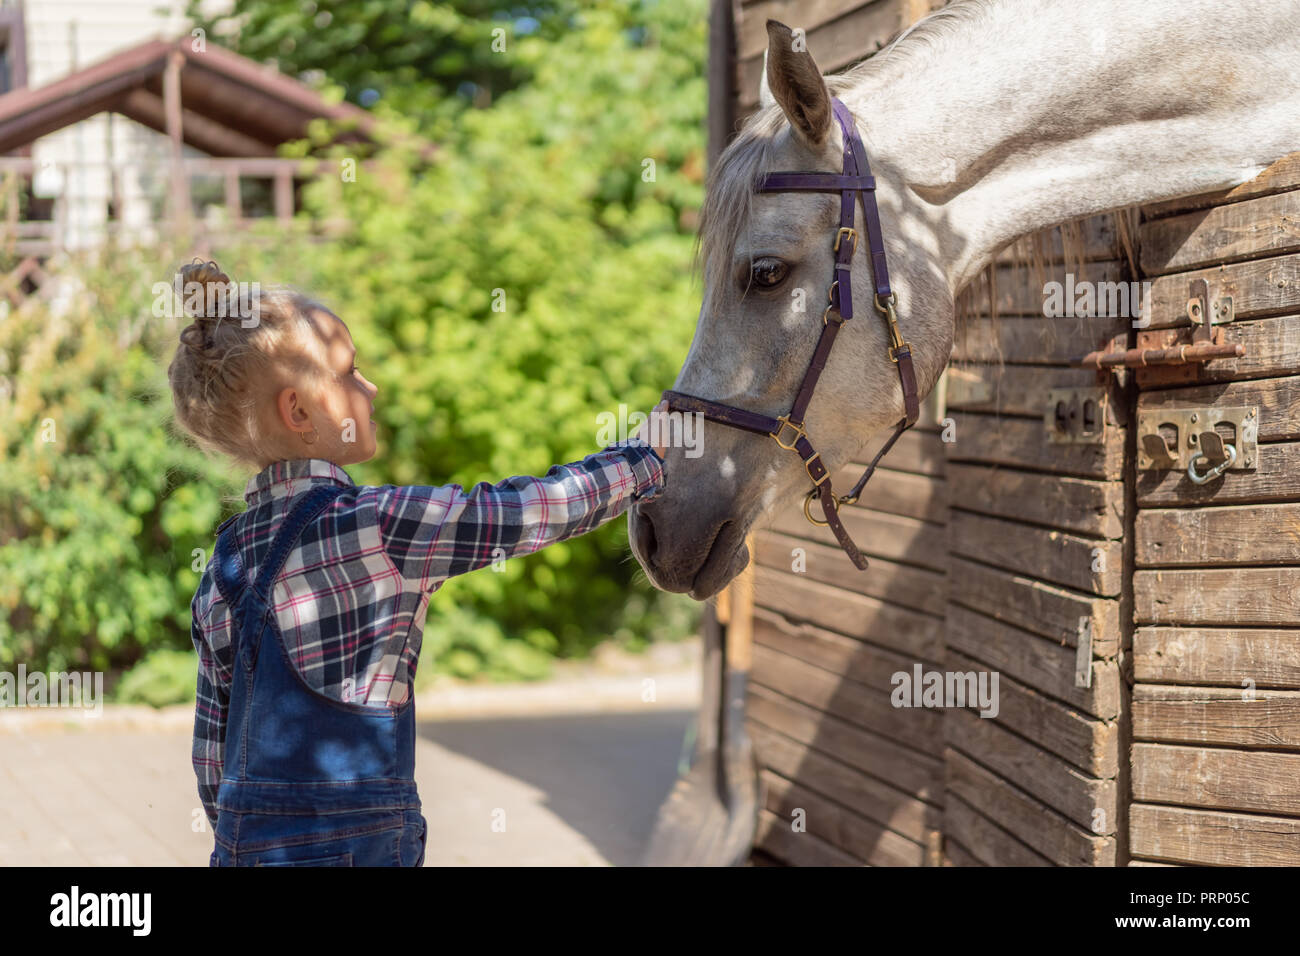 side view of pre-adolescent child palming horse at farm Stock Photo